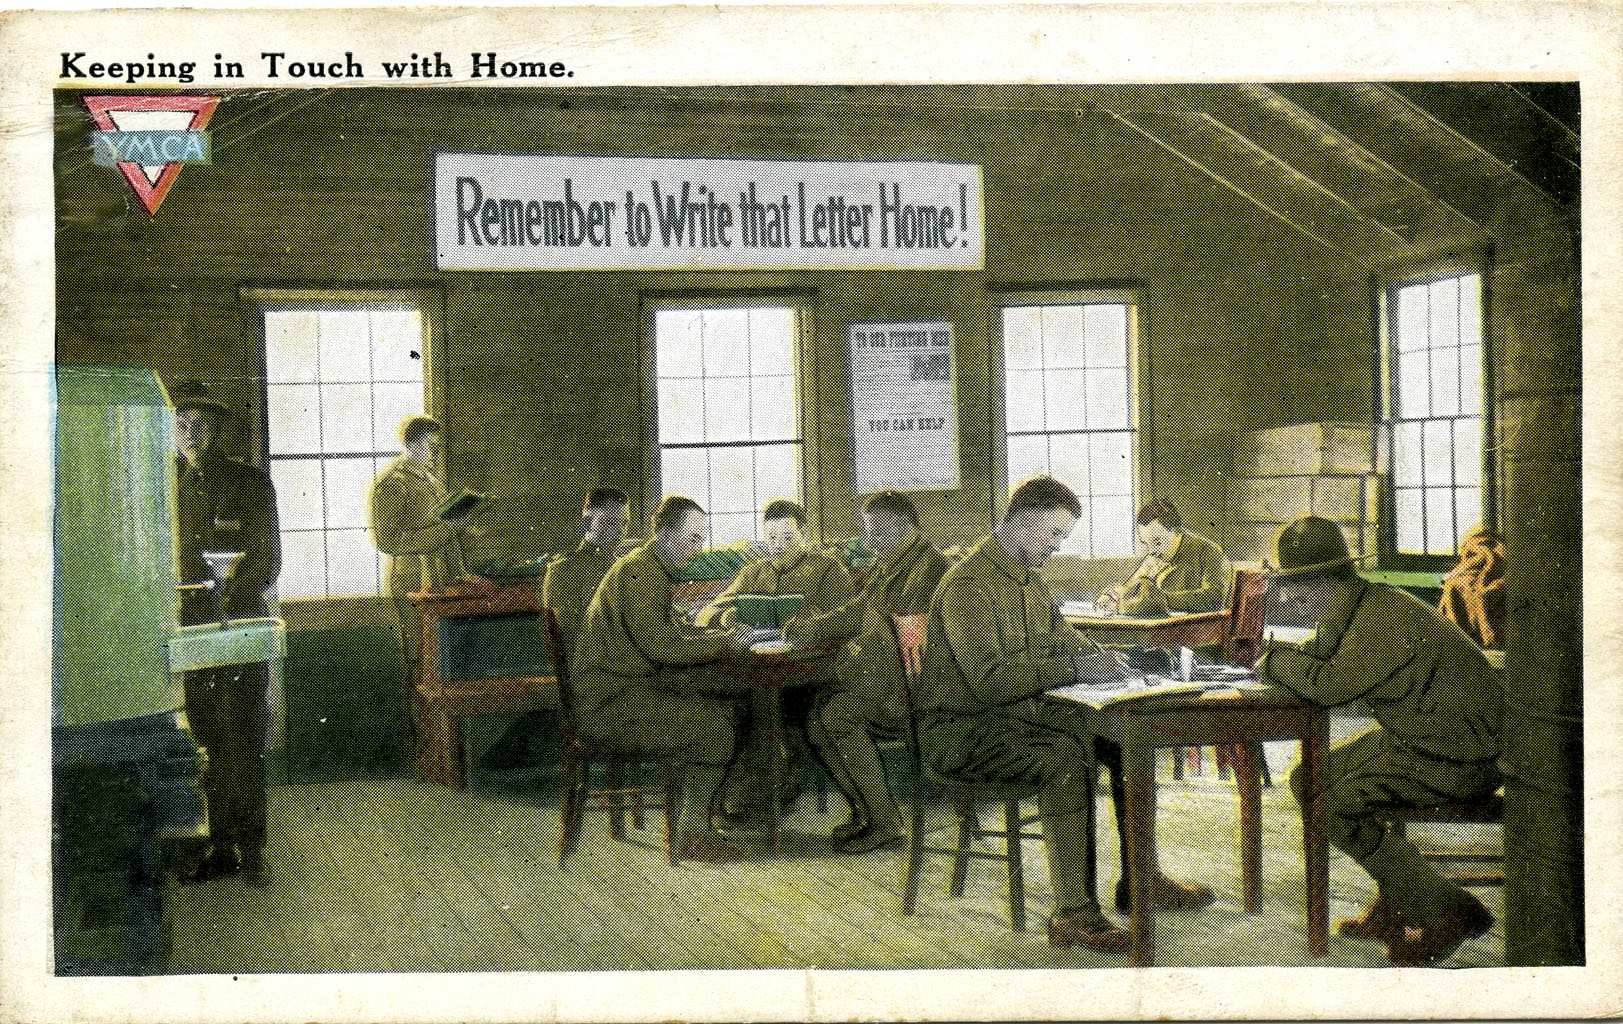 A postcard showing soldiers writing letter back home.